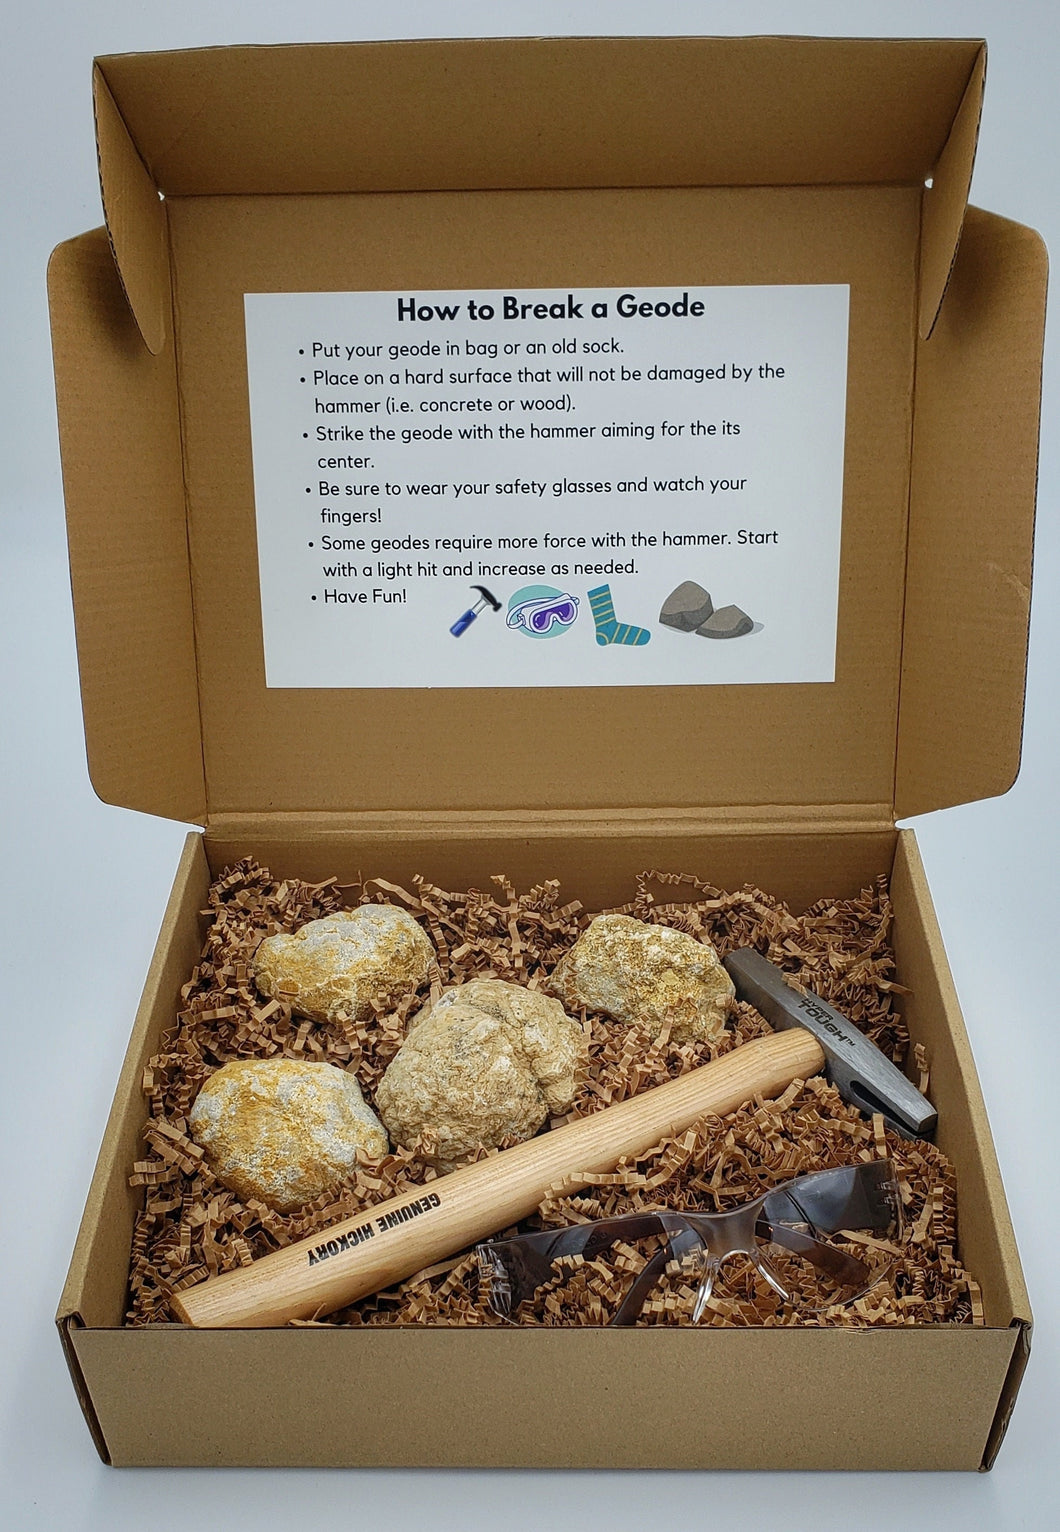 Moroccan Geode Kit, Break Open Your Own Geodes, Includes 4 Geodes, 1 Hammer , 1 Pair Safety Glasses